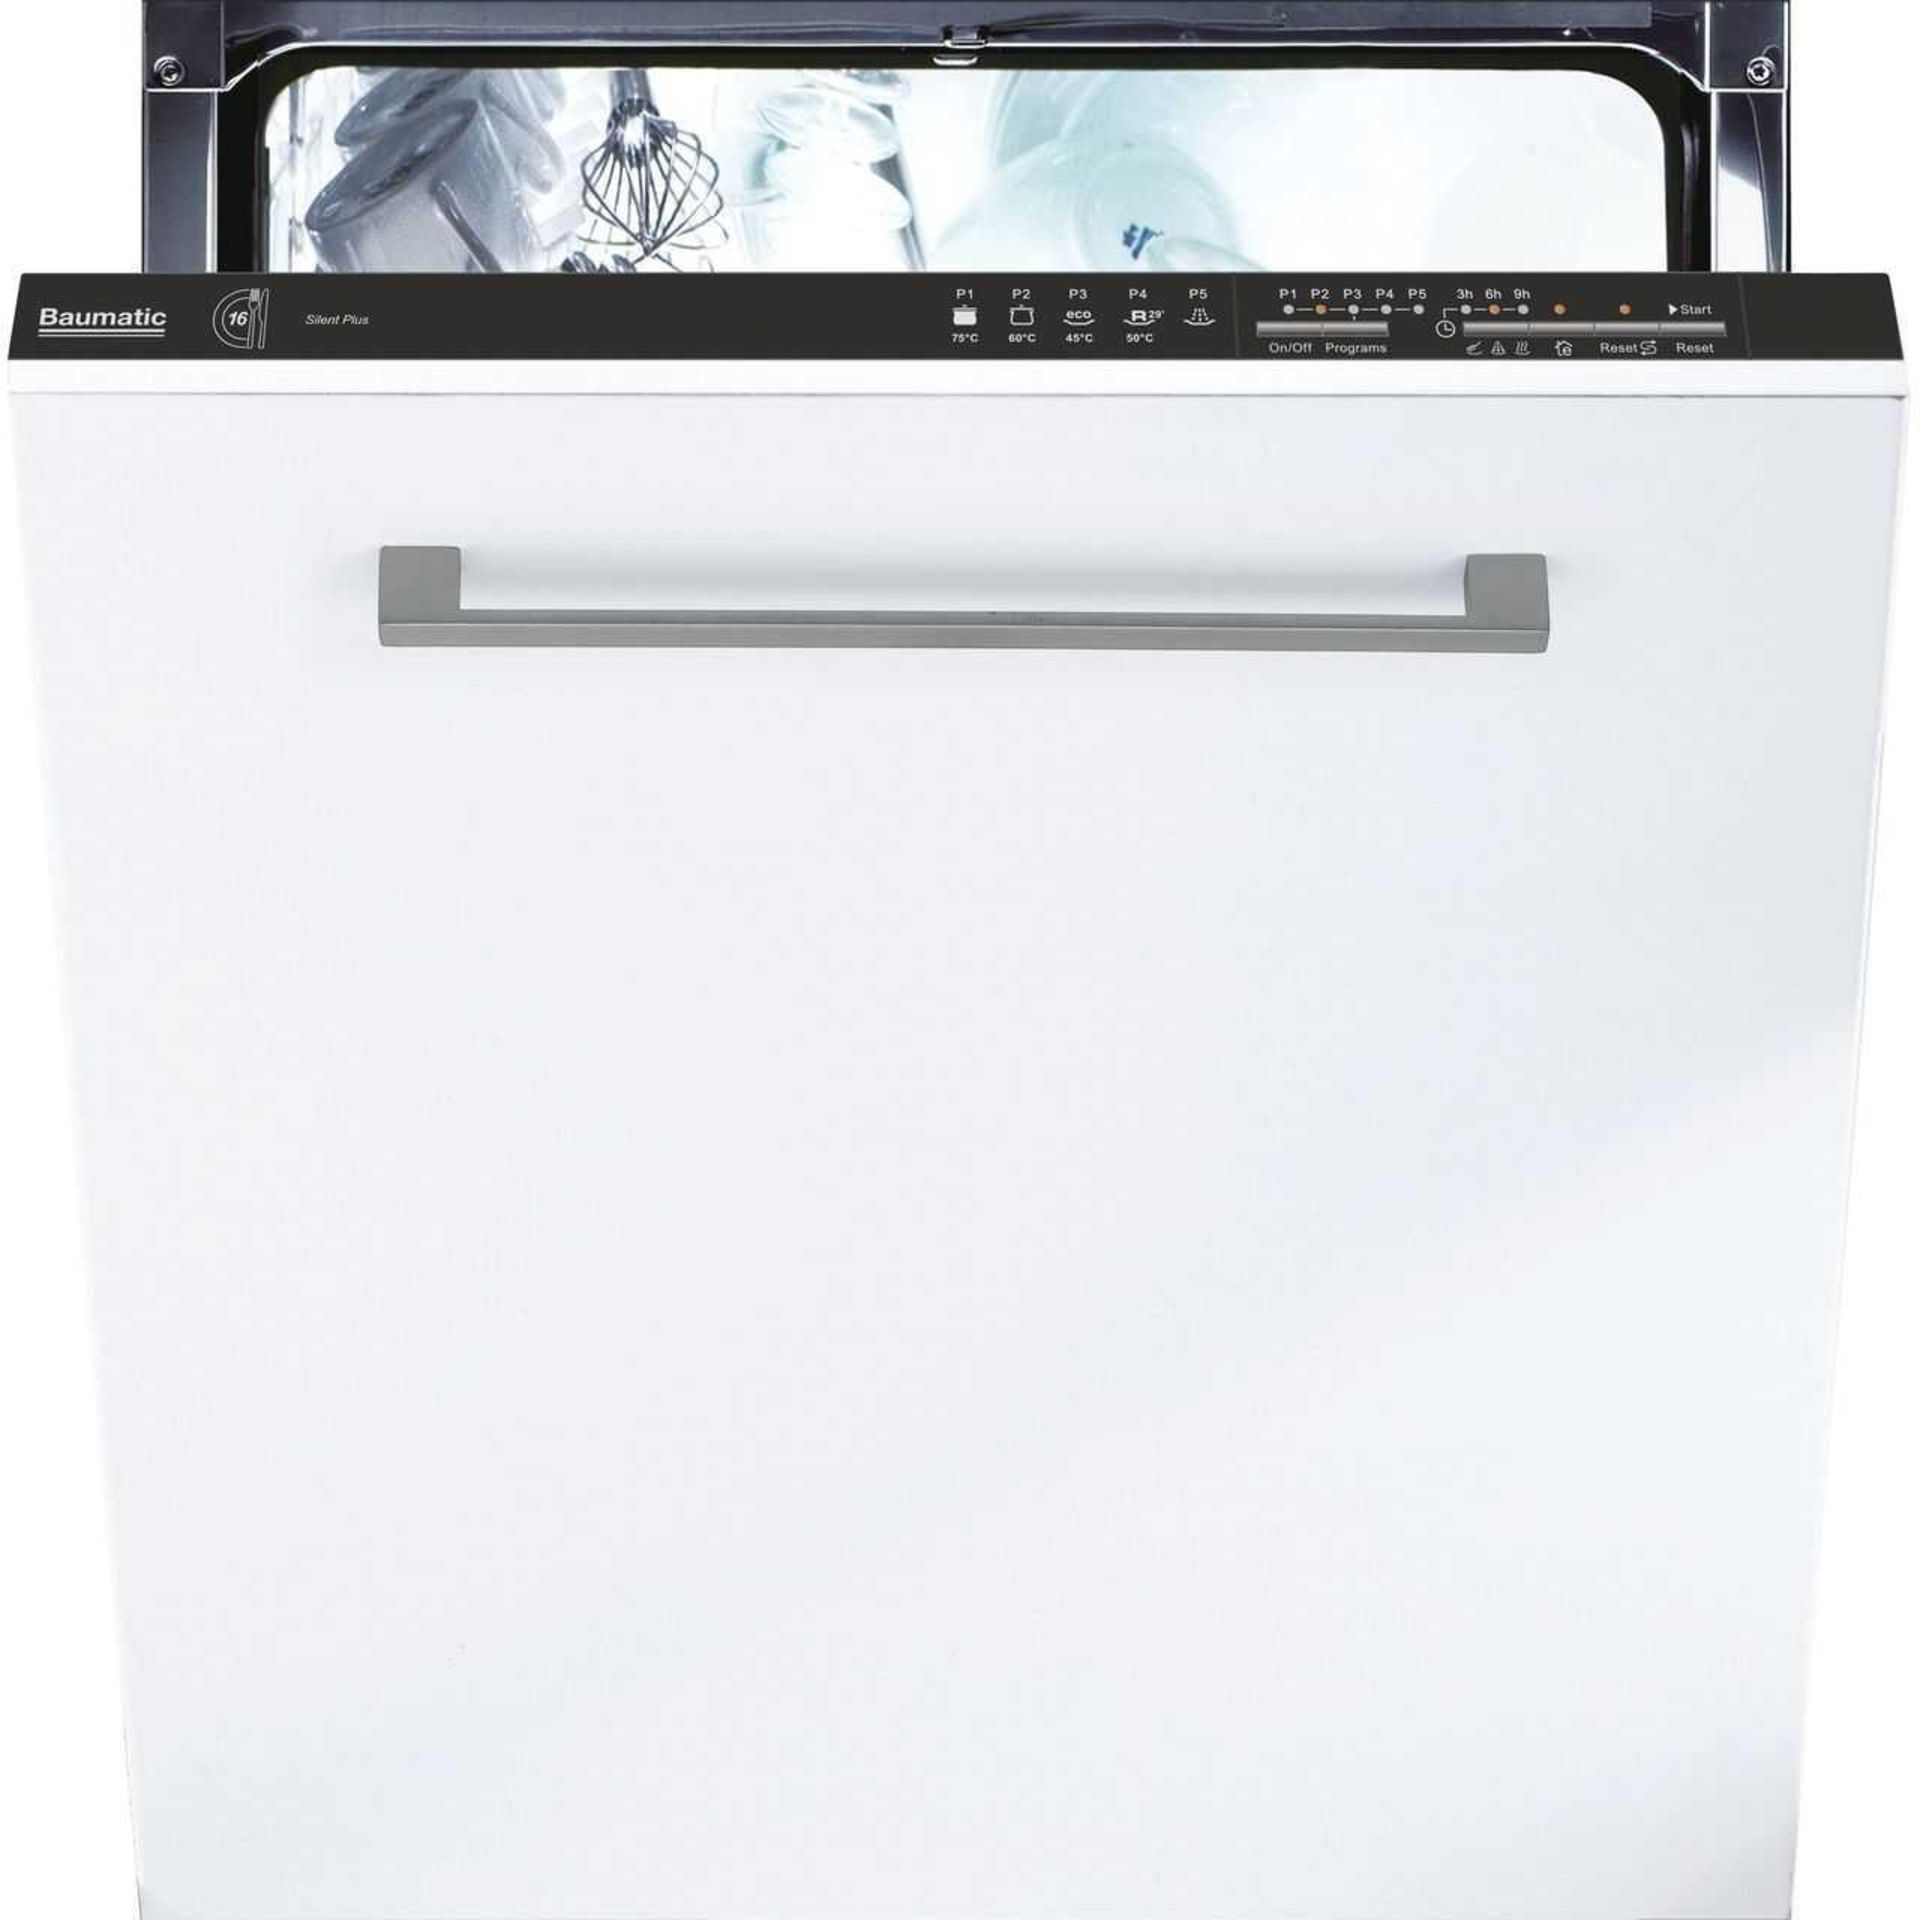 (Sp) RRP £320 Lot To Contain 1 Baumatic Bi6E4Lb Fully Integrated Standard Dishwasher - Black Contro - Image 2 of 4